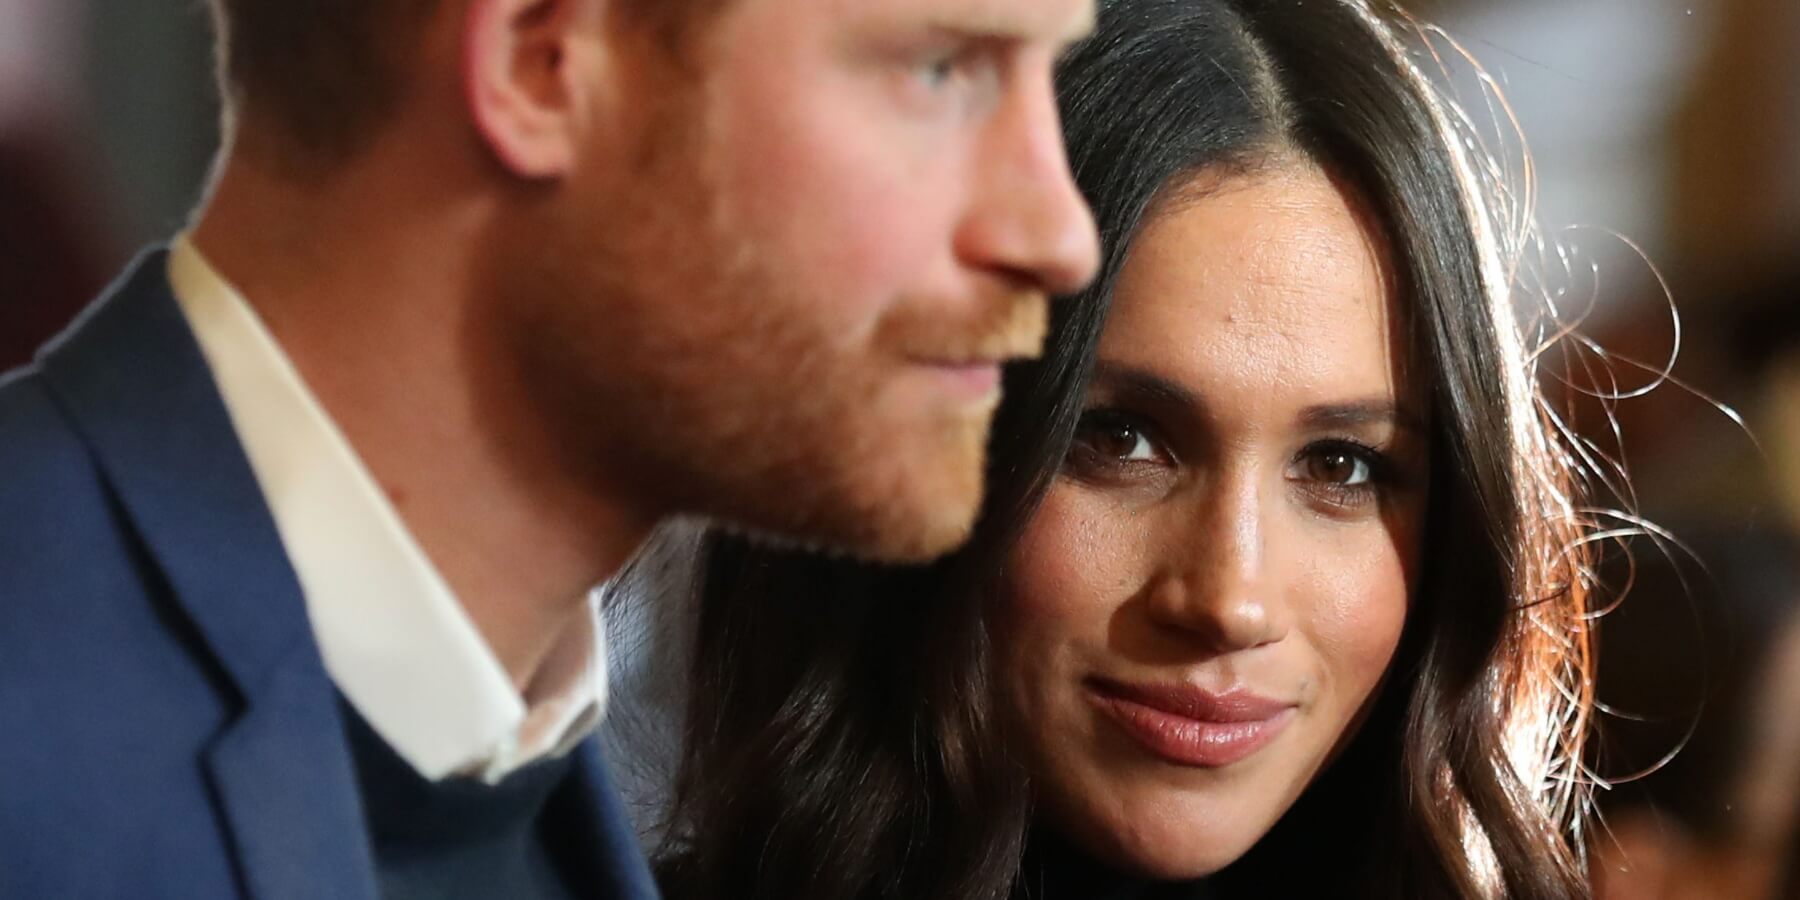 Prince Harry and Meghan Markle are coming off the 'worst year of their lives' says a royal commentator.